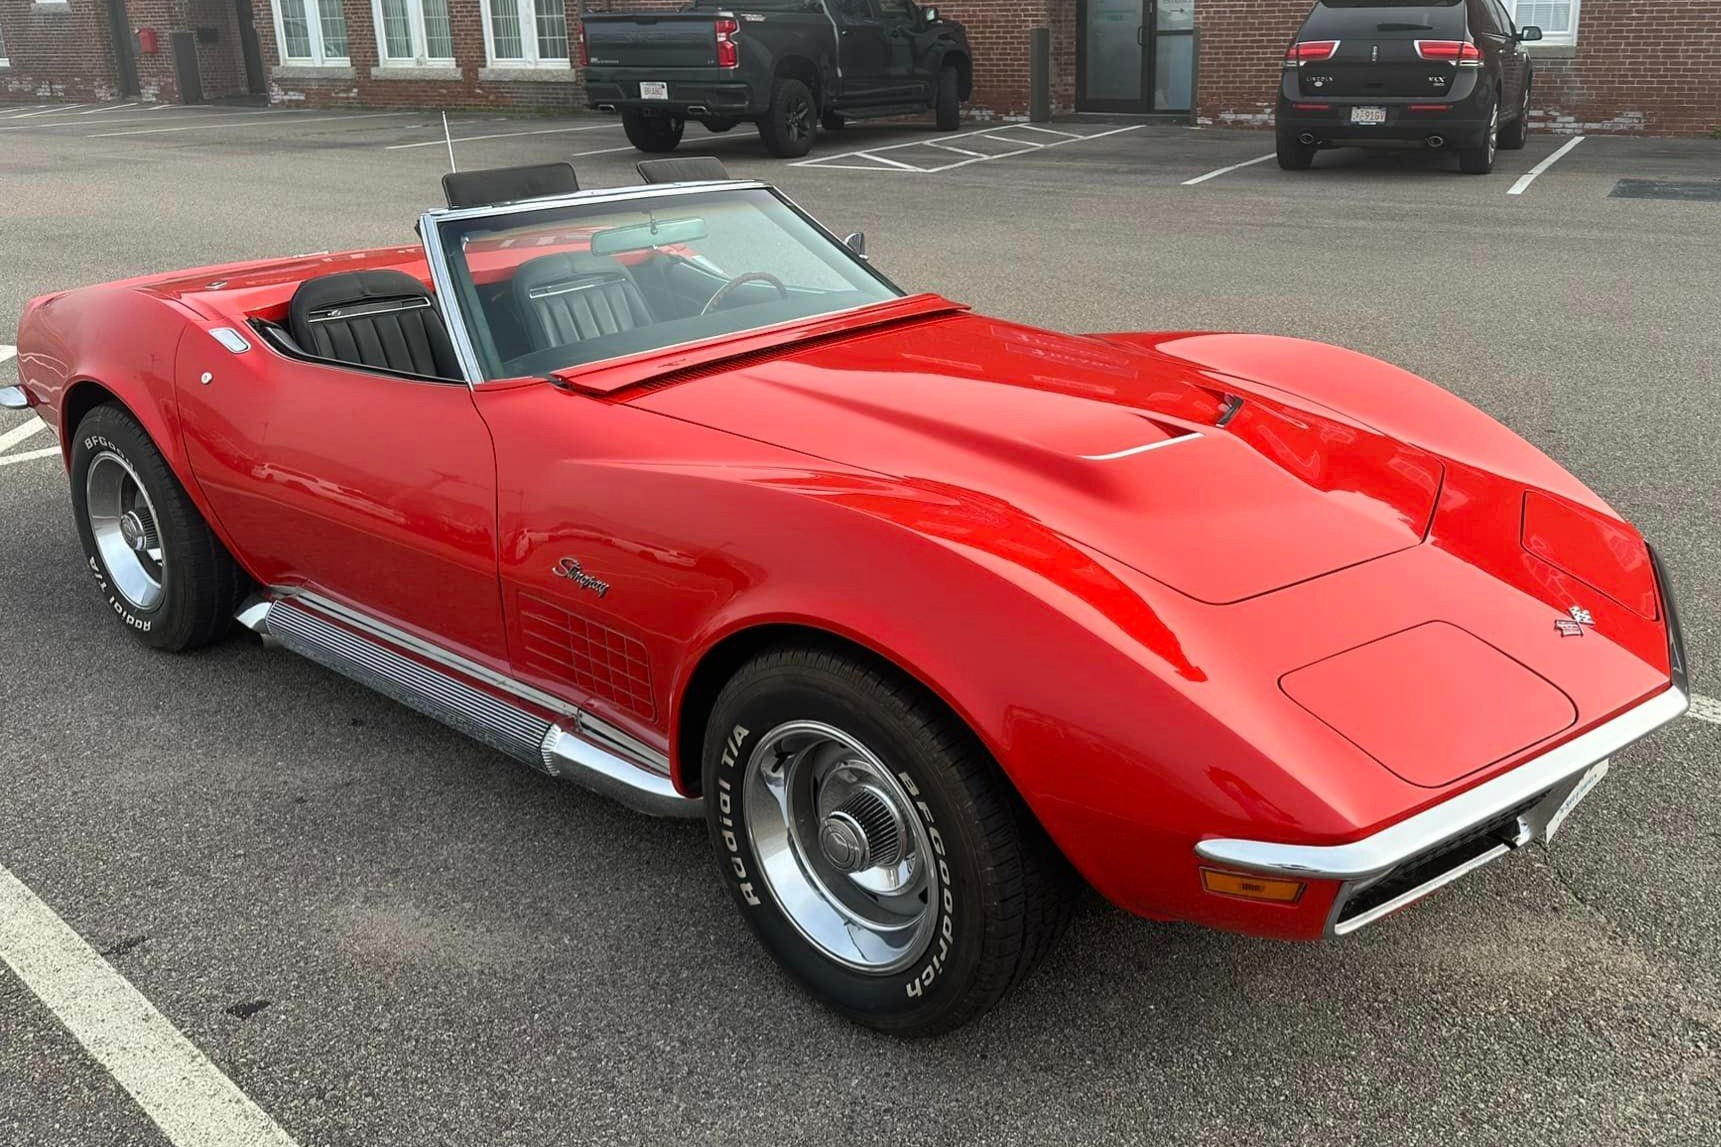 Used 1970 Chevrolet Corvette Convertible 4-Speed Review